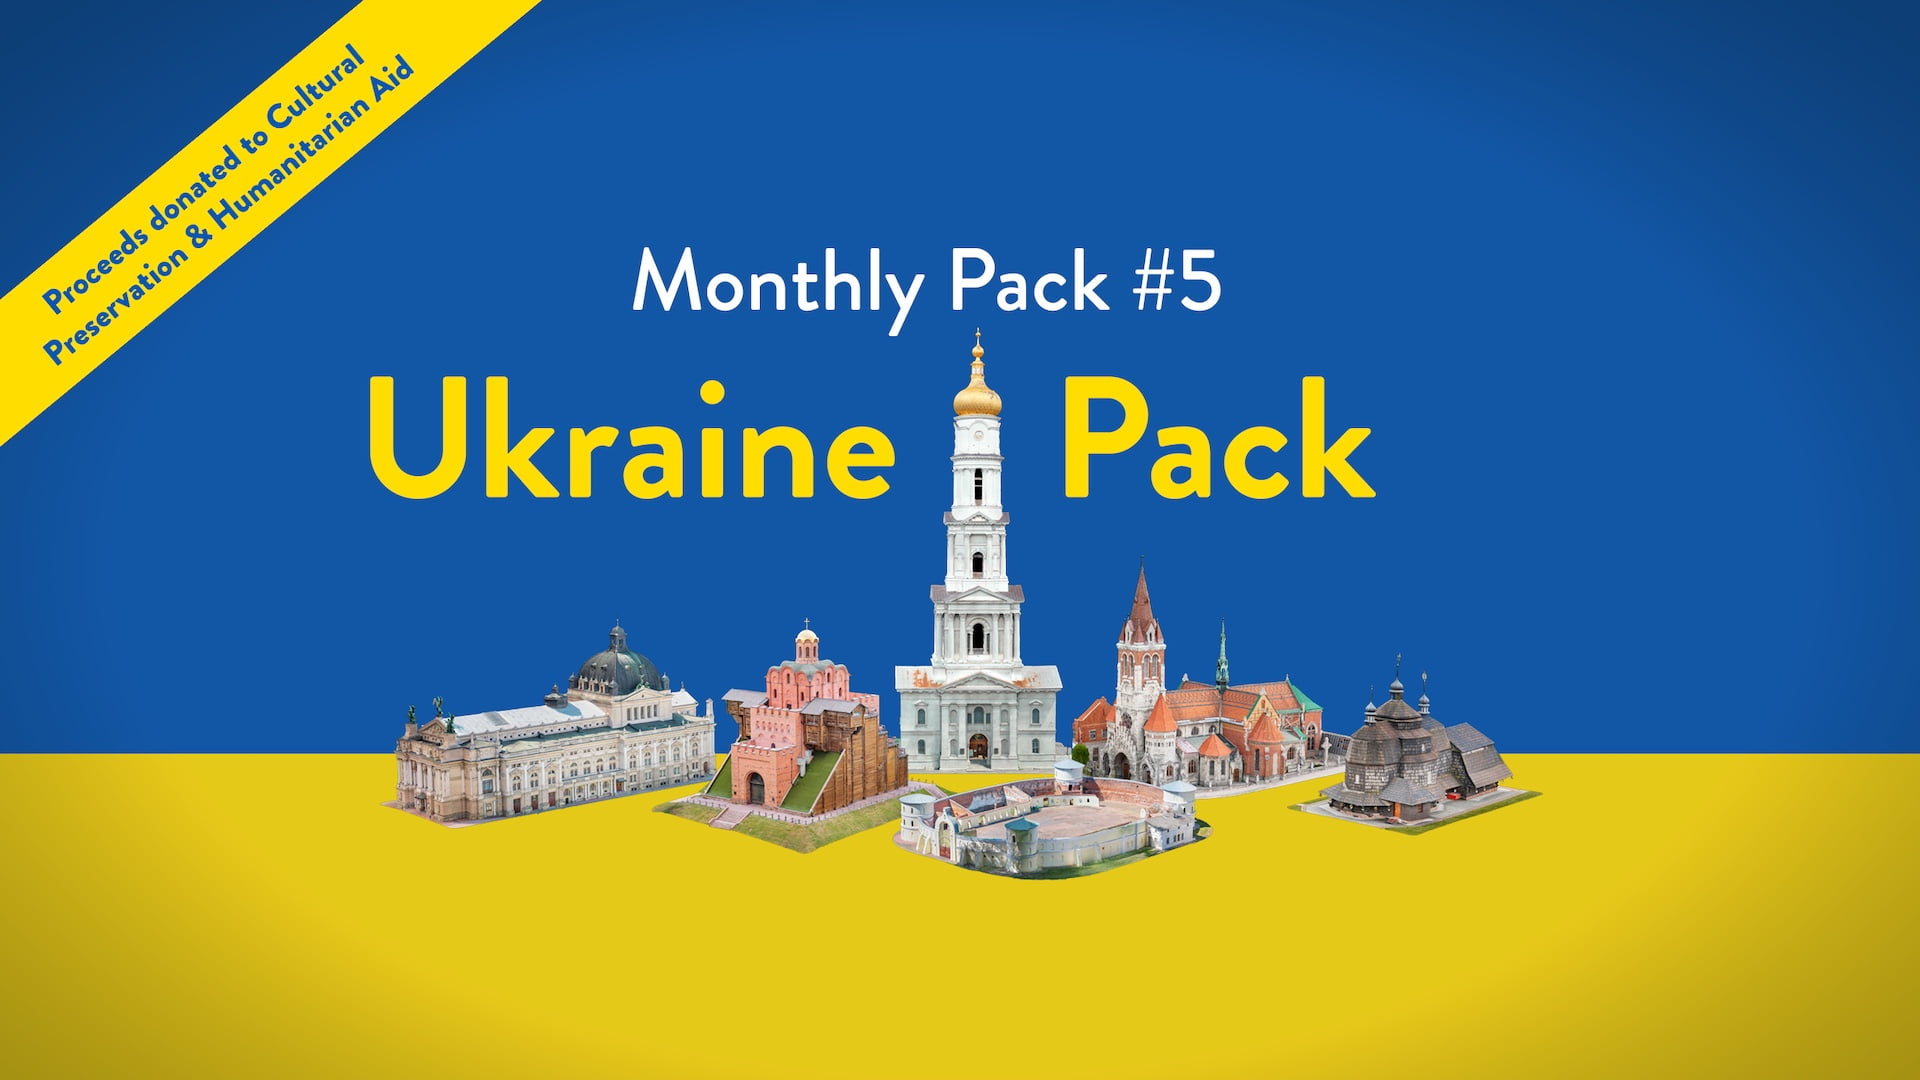 Puzzling Places: New DLC brings Ukrainian monuments, proceeds go to charity